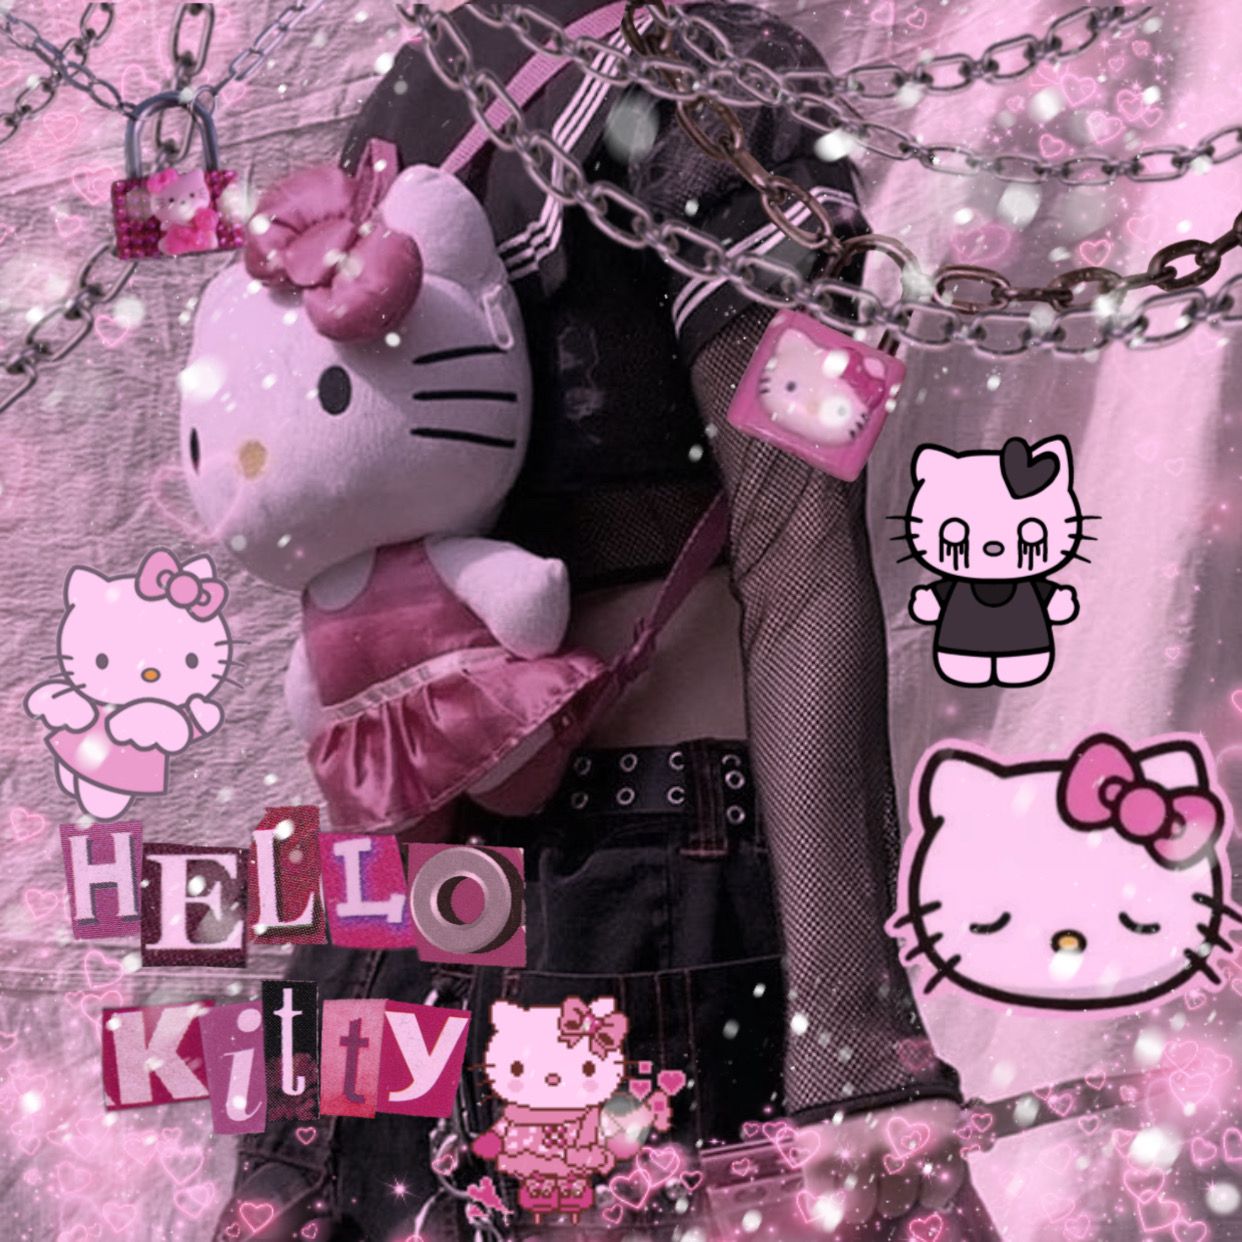 Search for Hellokitty Image